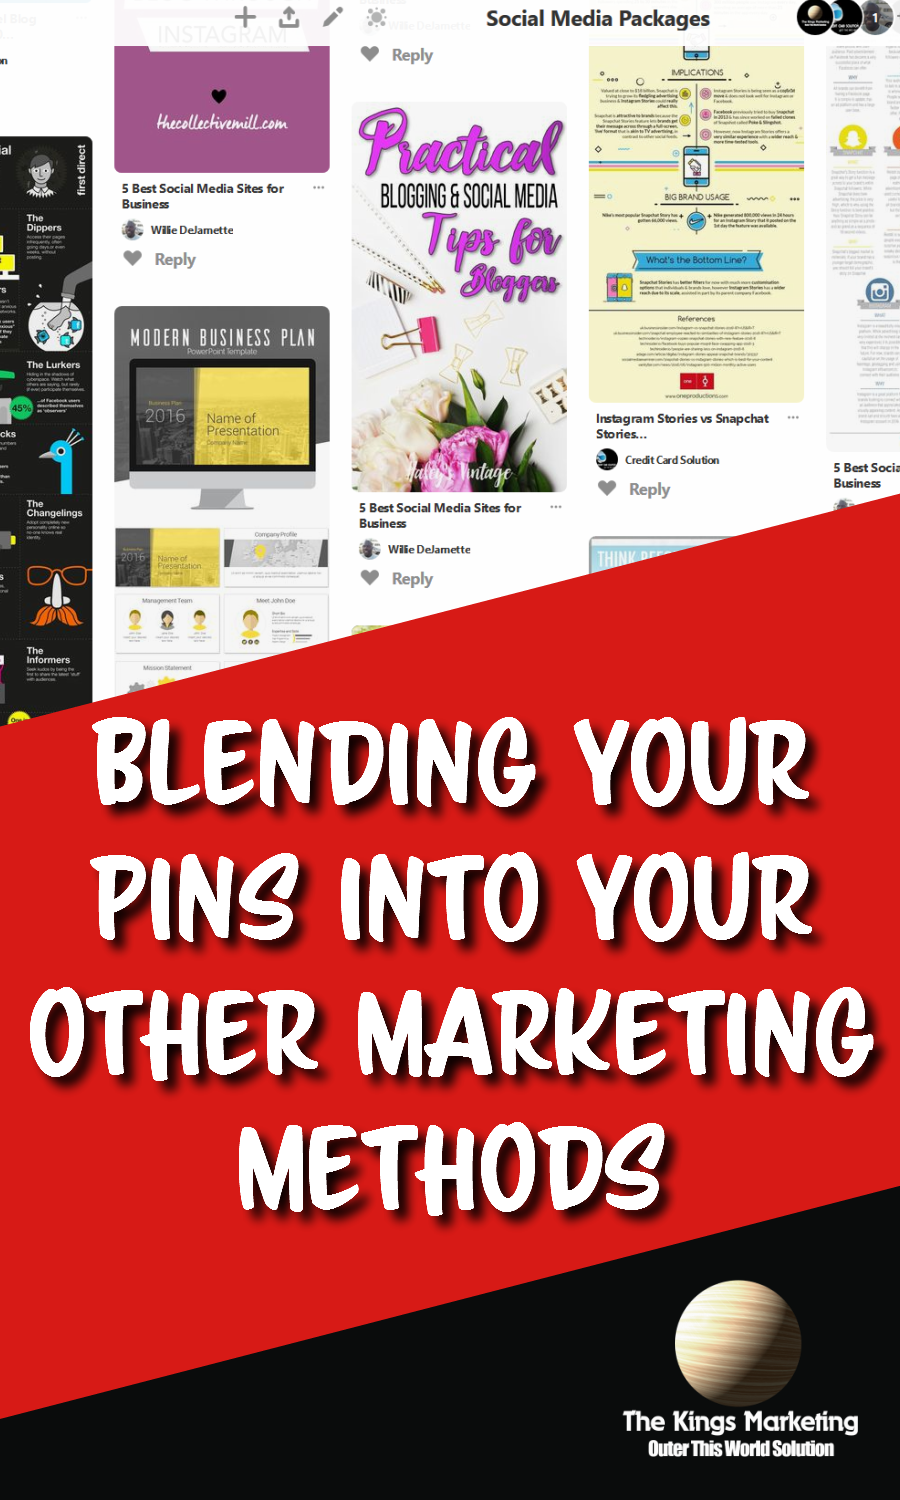 Blending Your Pins into Your Other Marketing Methods